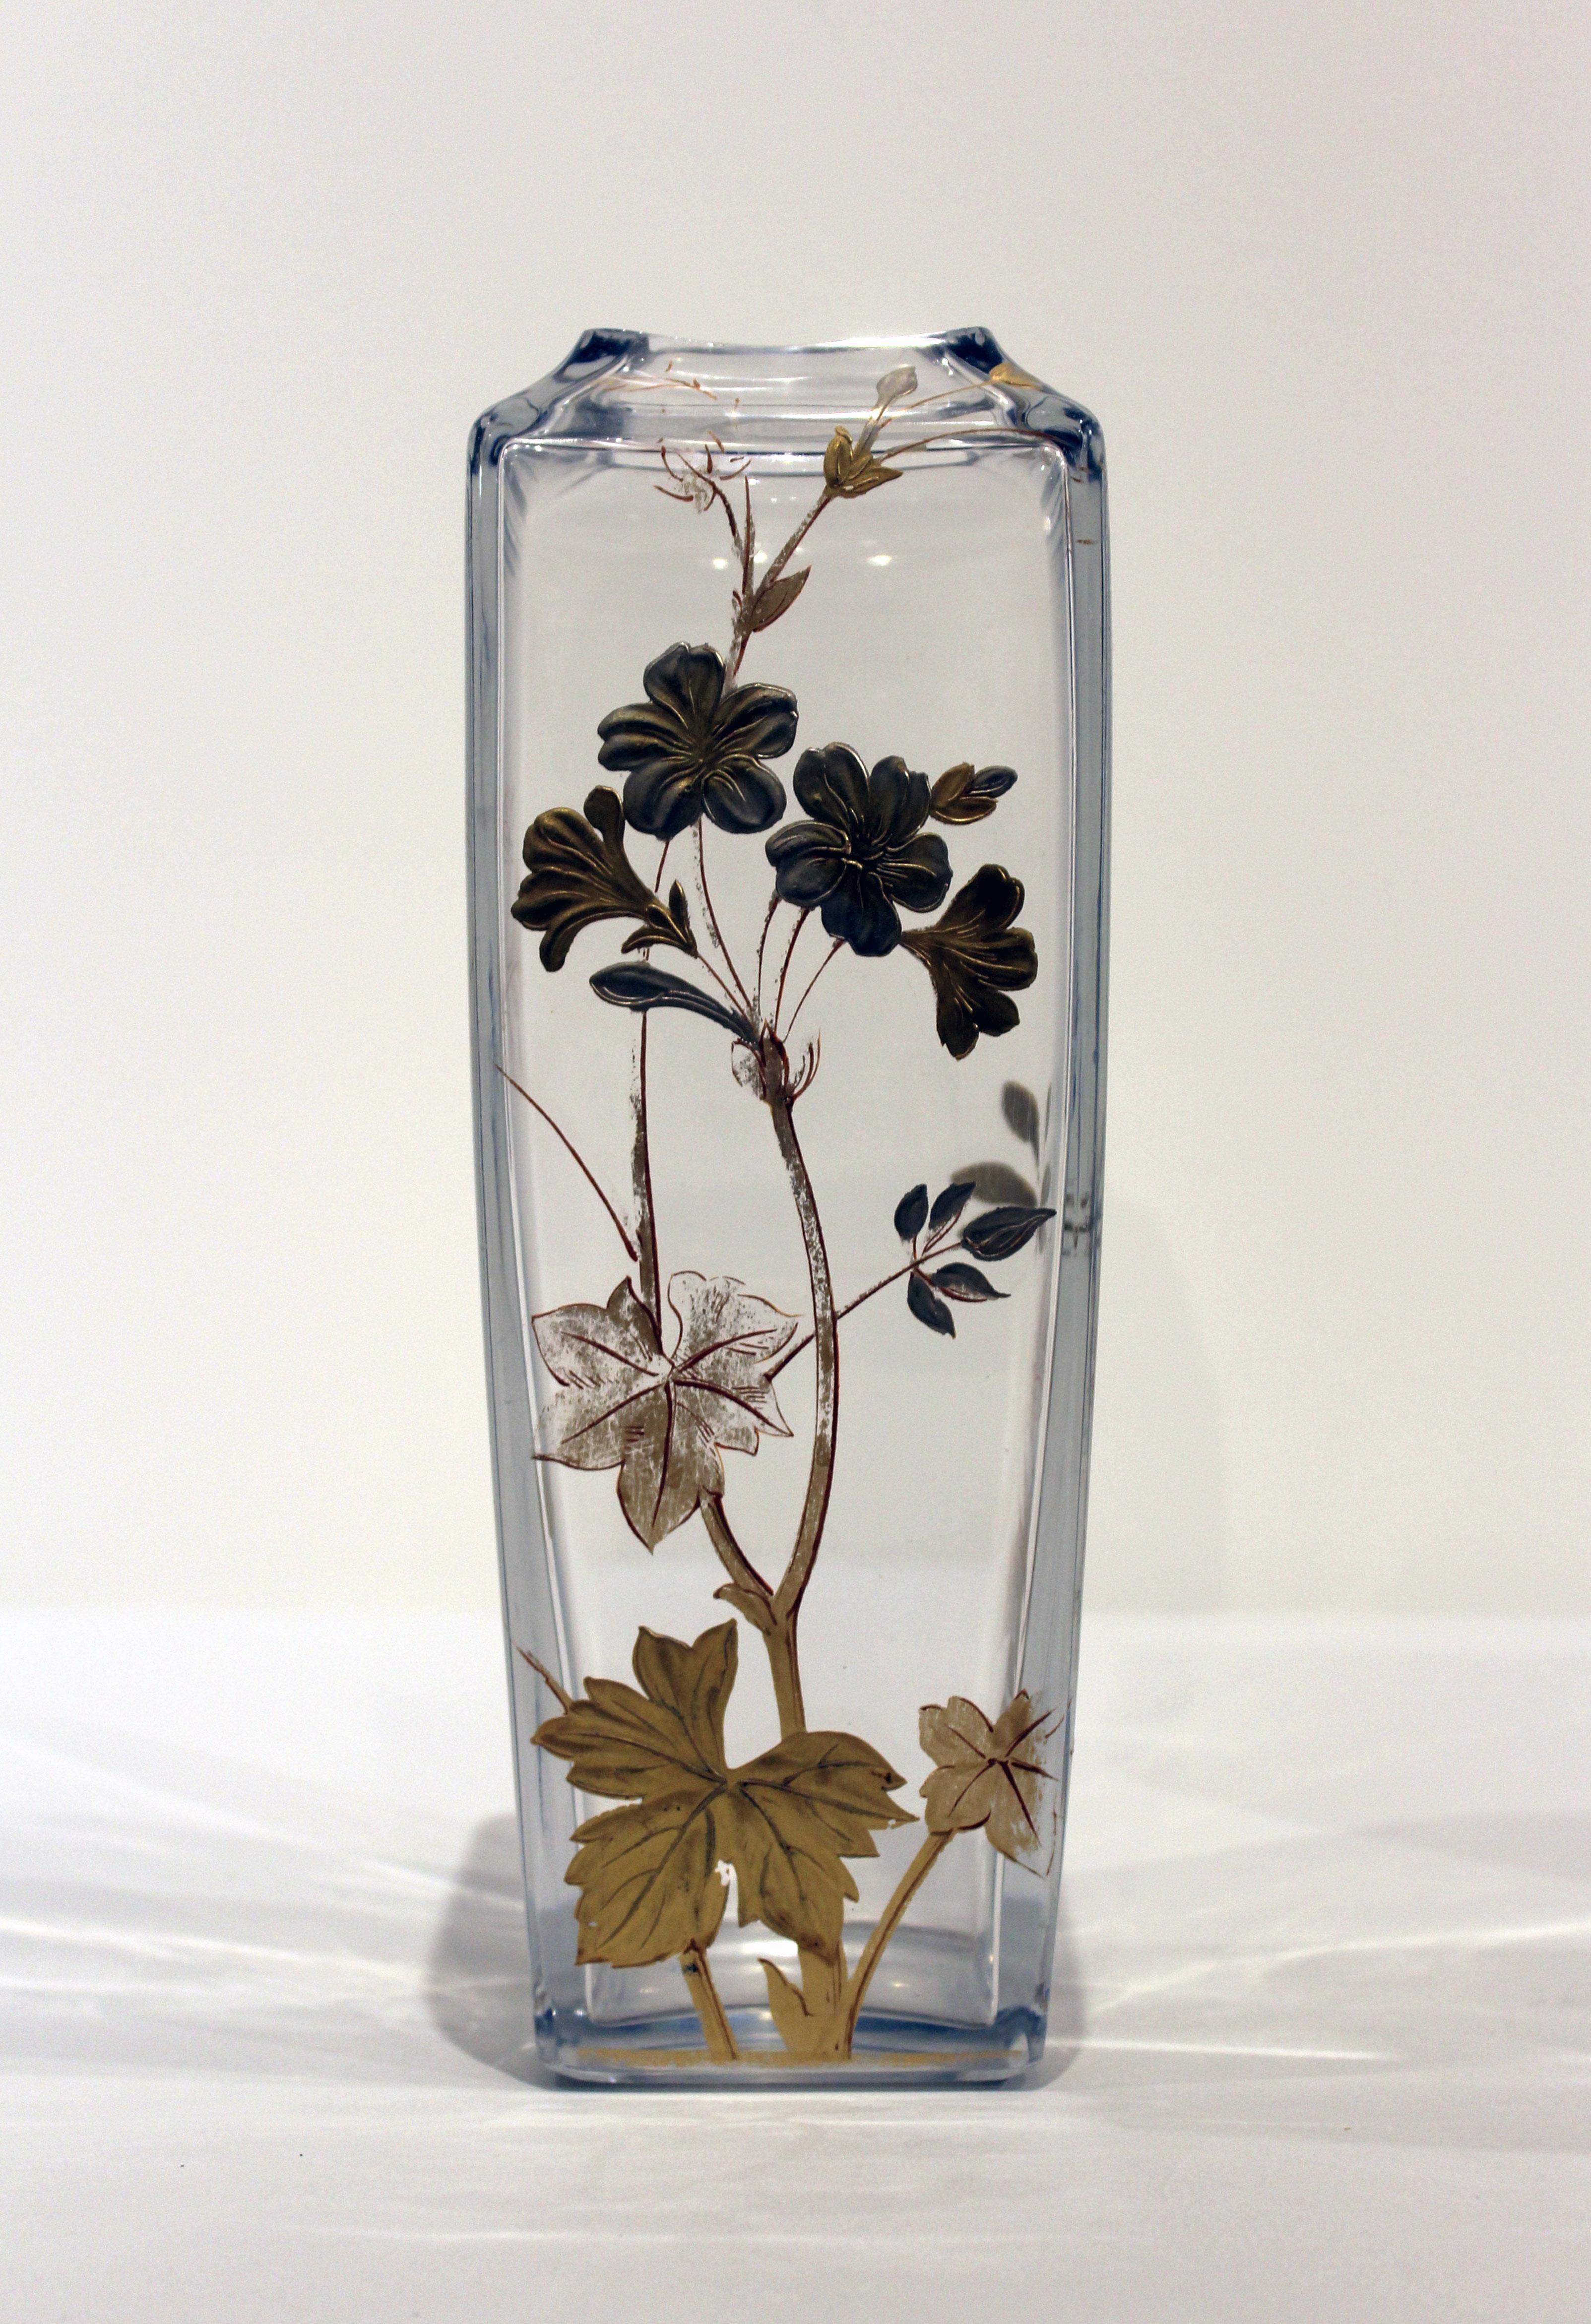 Pair of early 20th century signed Baccarat glass vases with gilded and silver raised flowers.